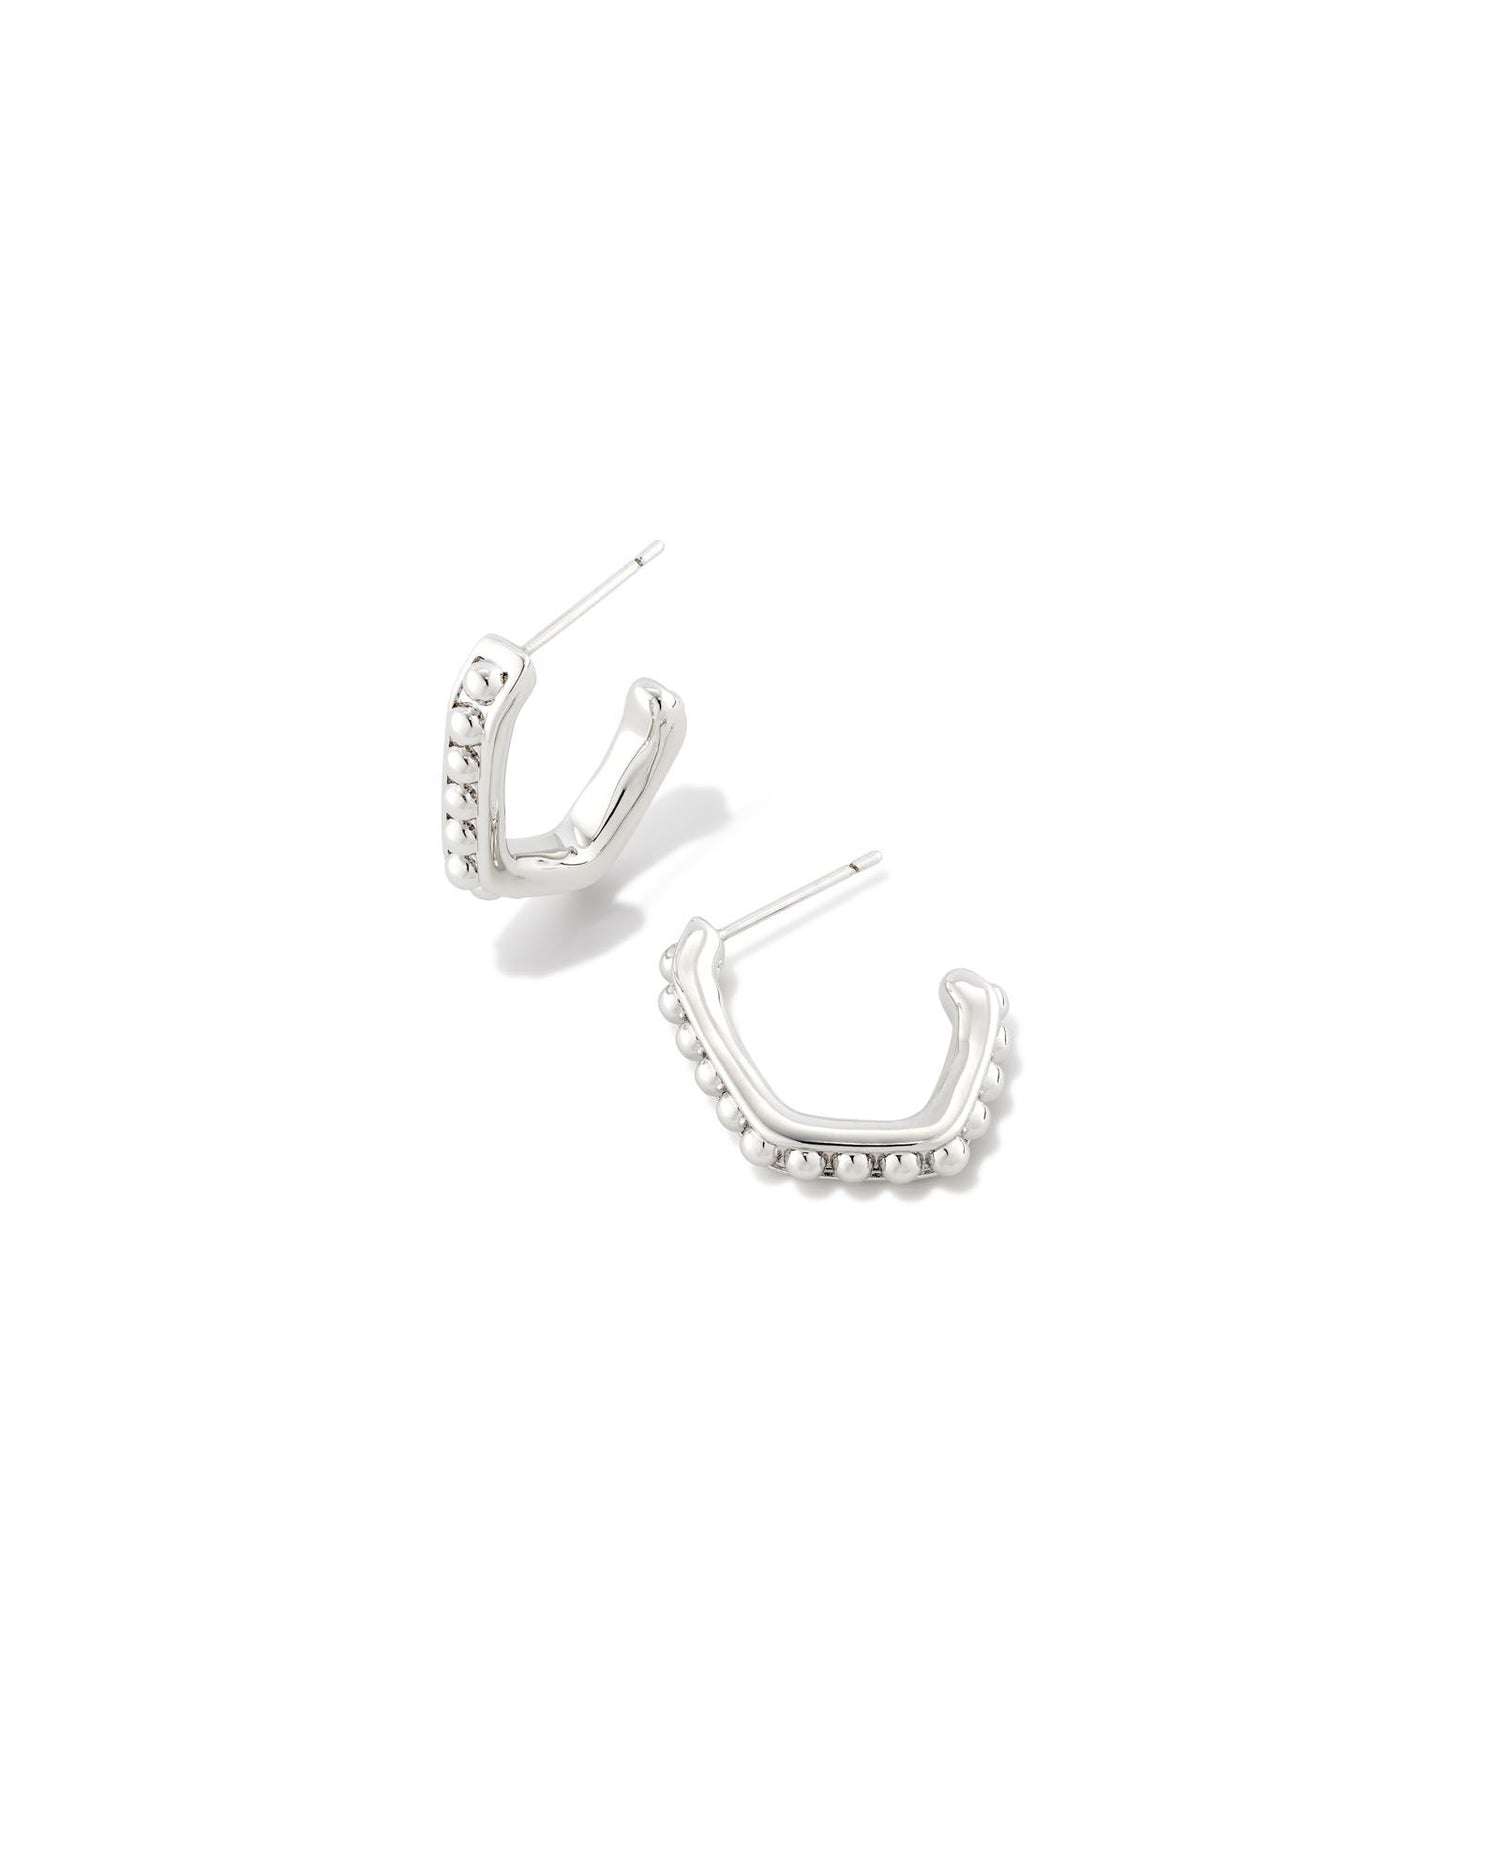 An elongated shape and sleek metal beads make the Lonnie Beaded Huggie Earrings an exciting new addition to your earring collection Silver Color